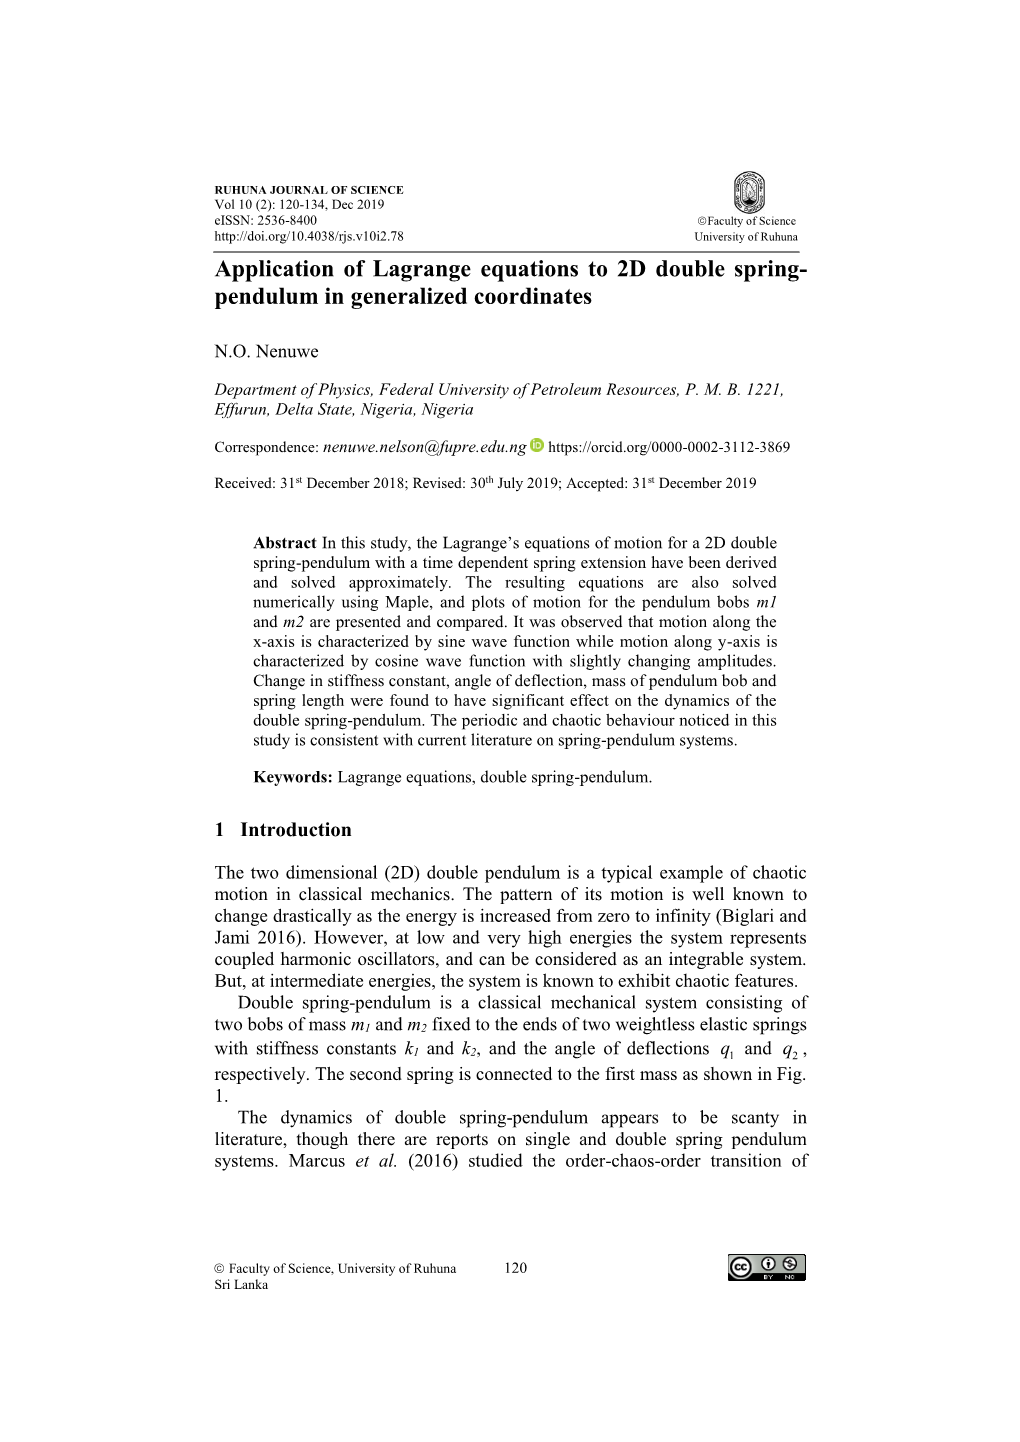 Application of Lagrange Equations to 2D Double Spring- Pendulum in Generalized Coordinates